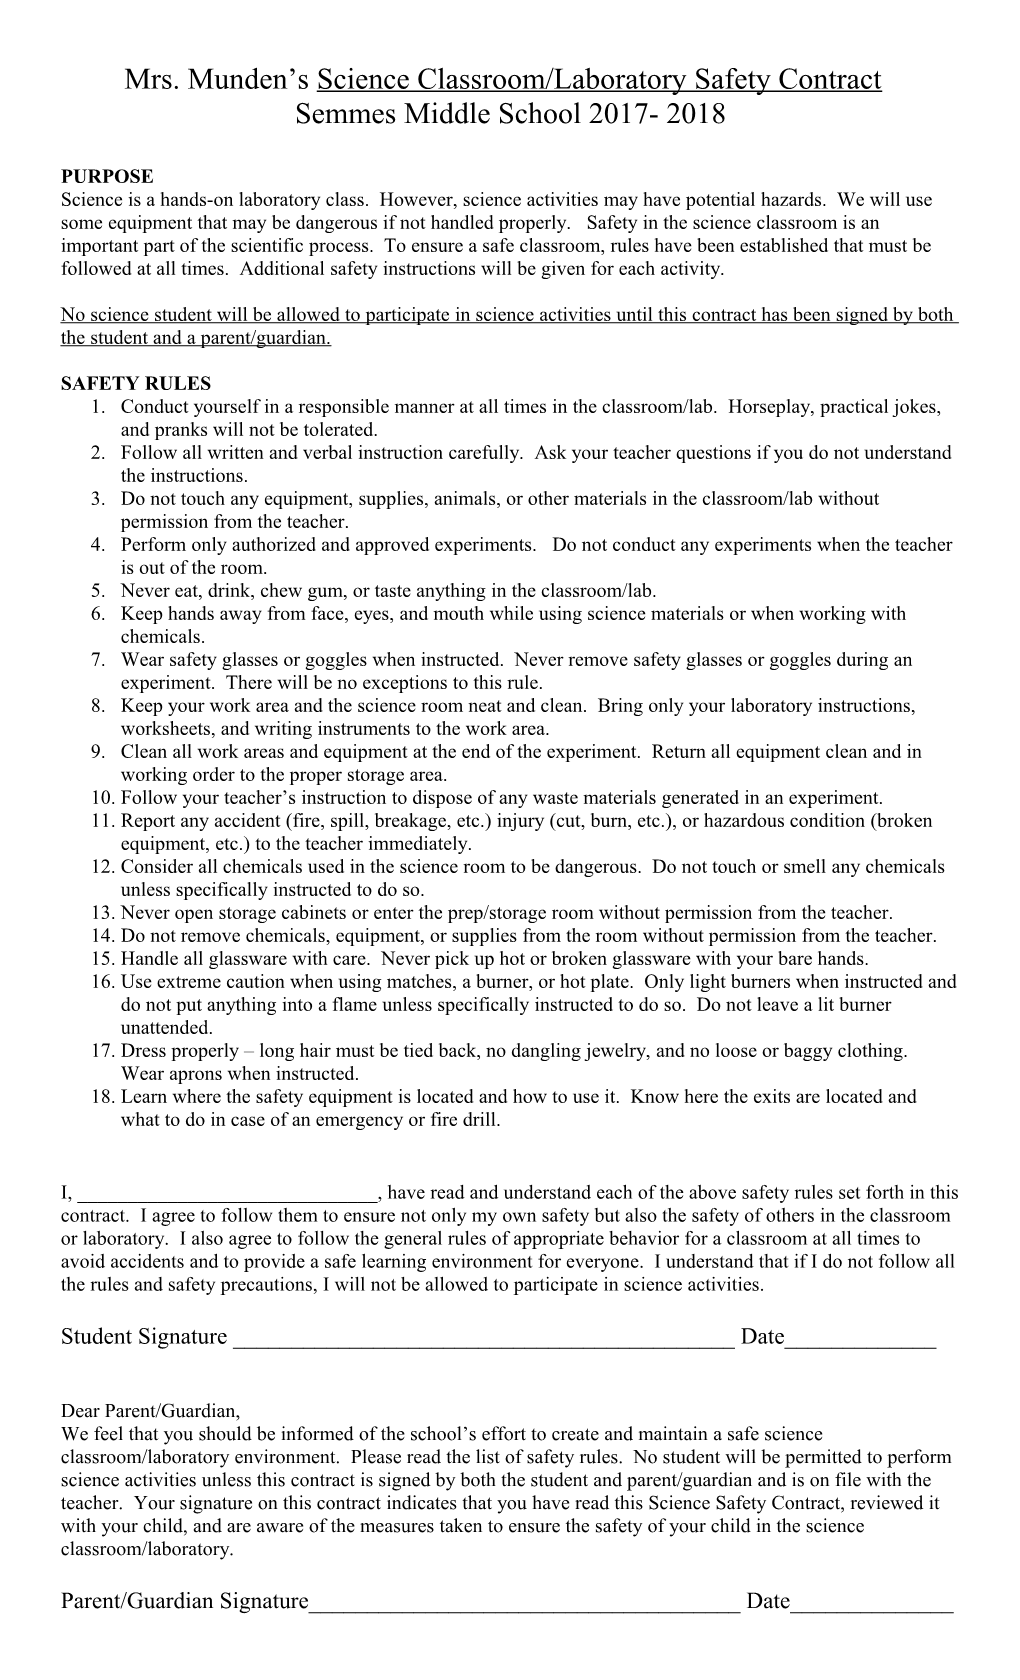 Van Middle School Science Safety Contract